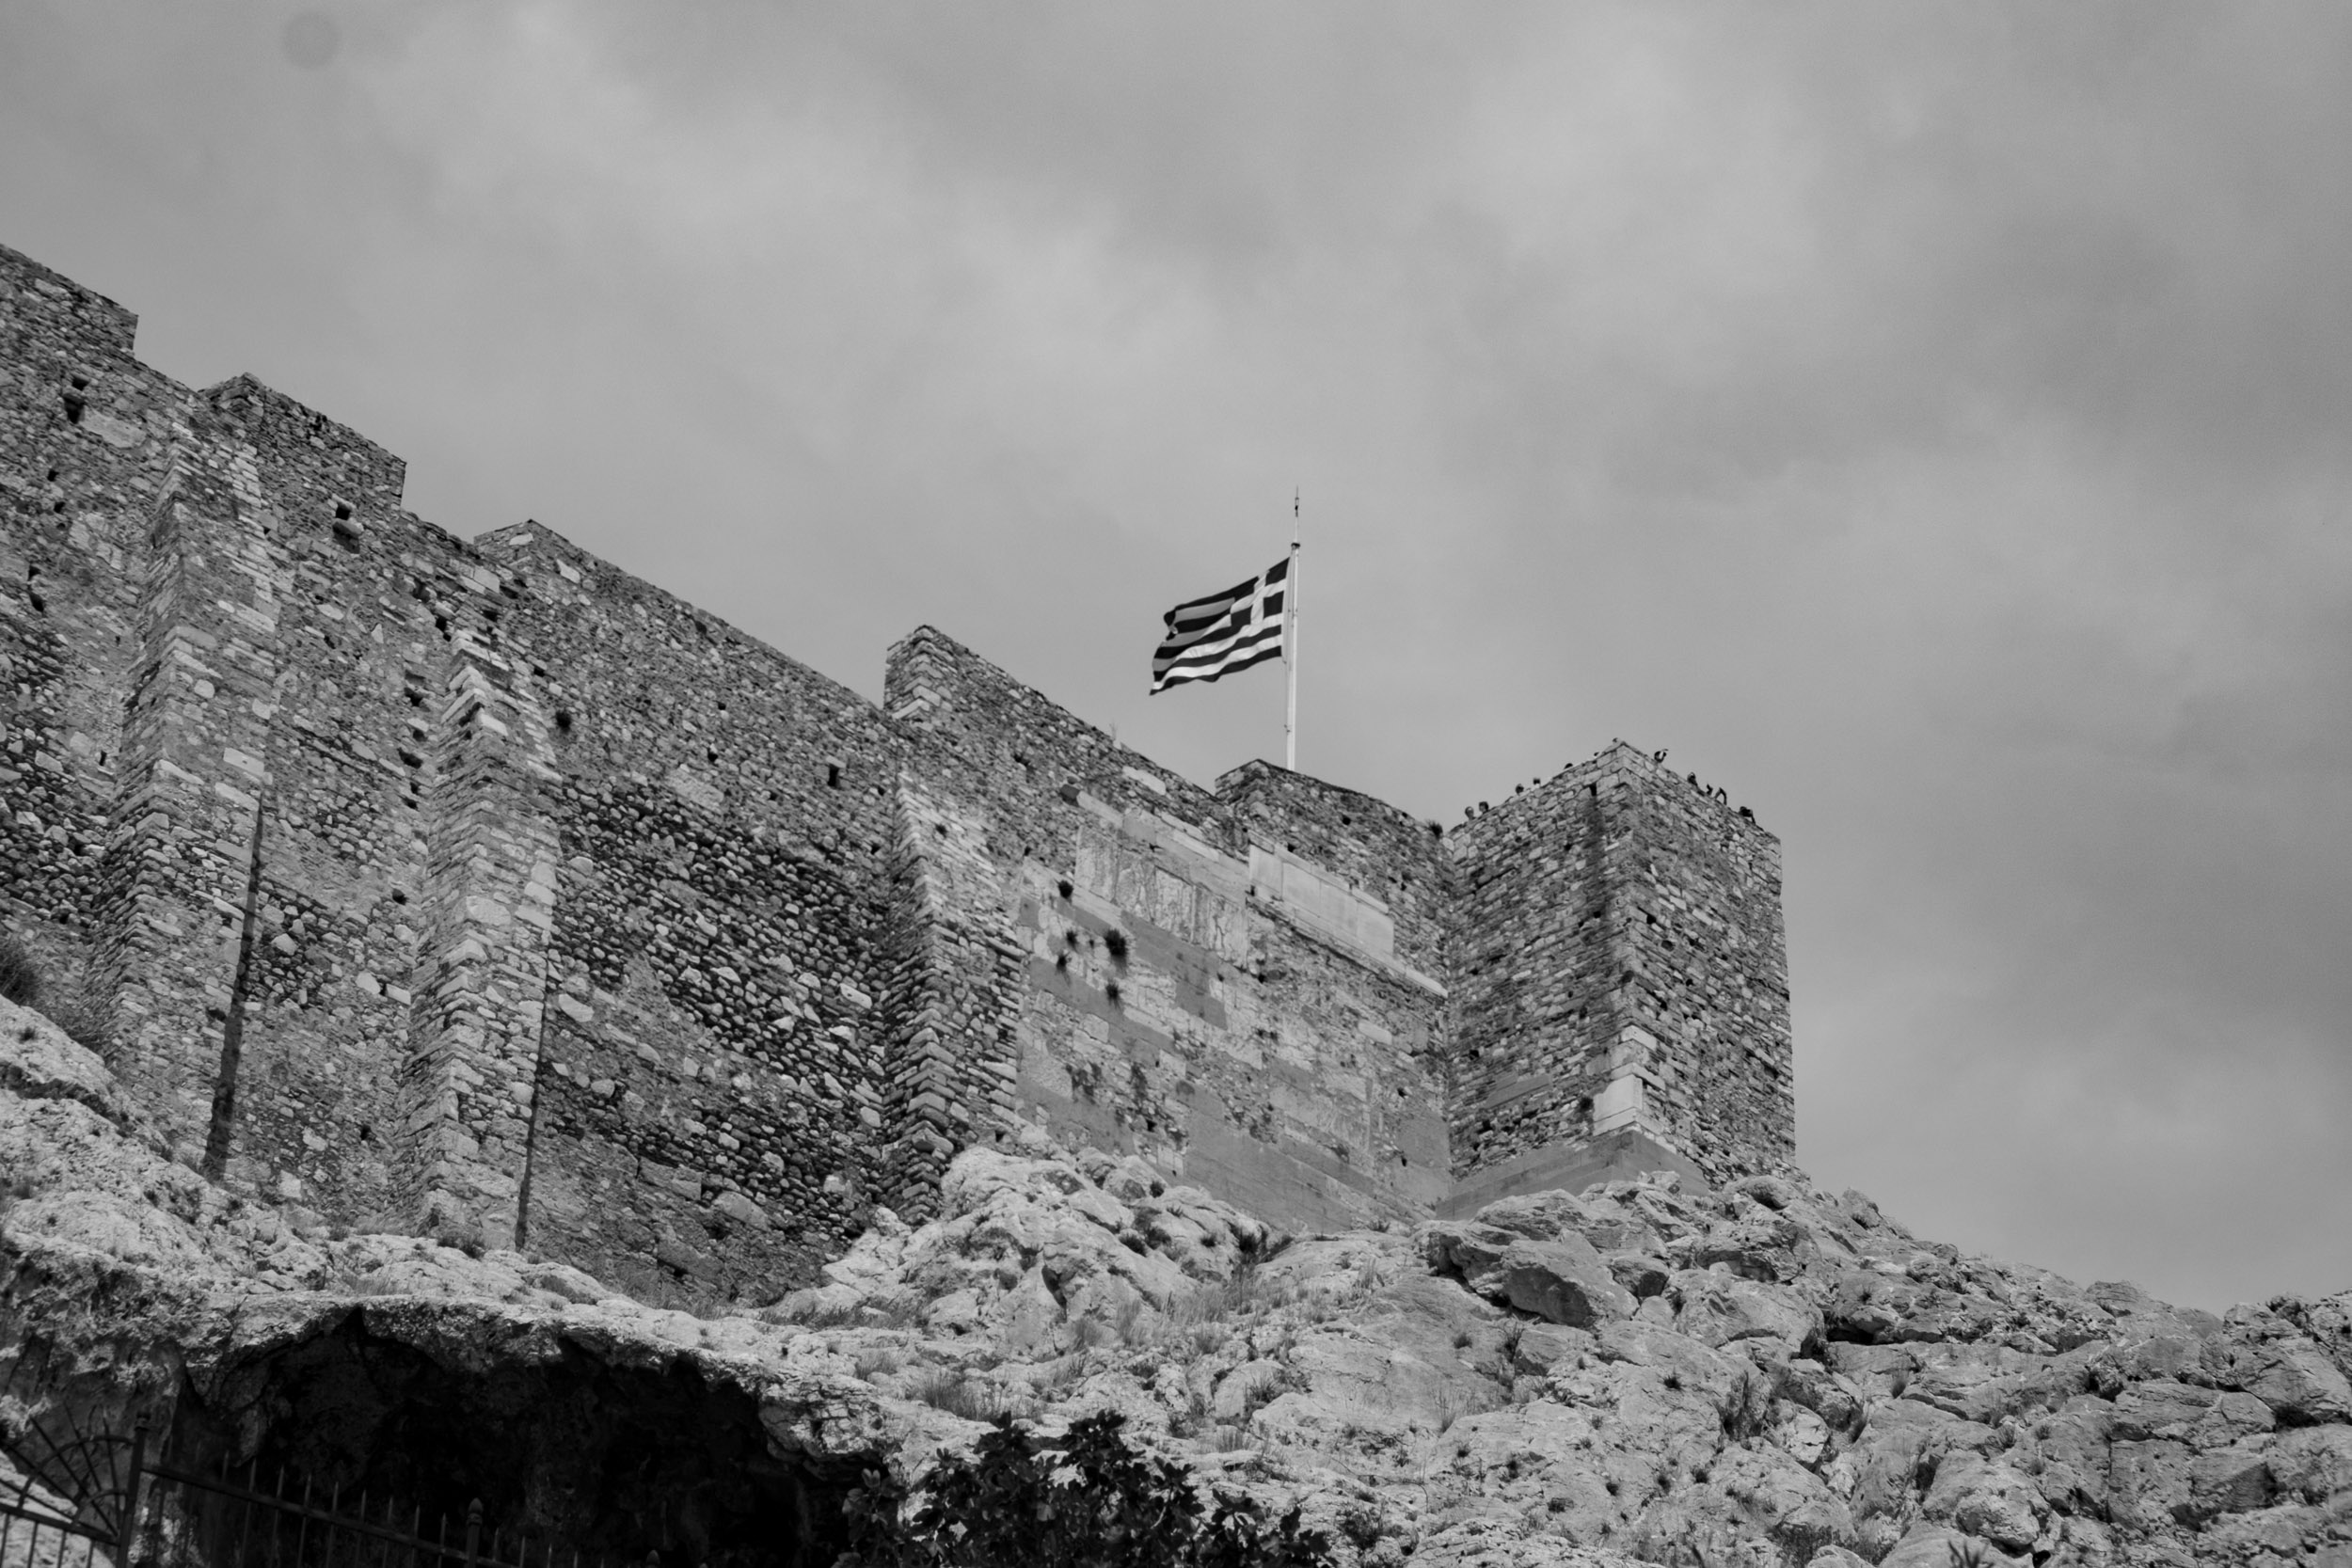 Flag of Greece flapping in the wind on top of the Acropolis in Athens.